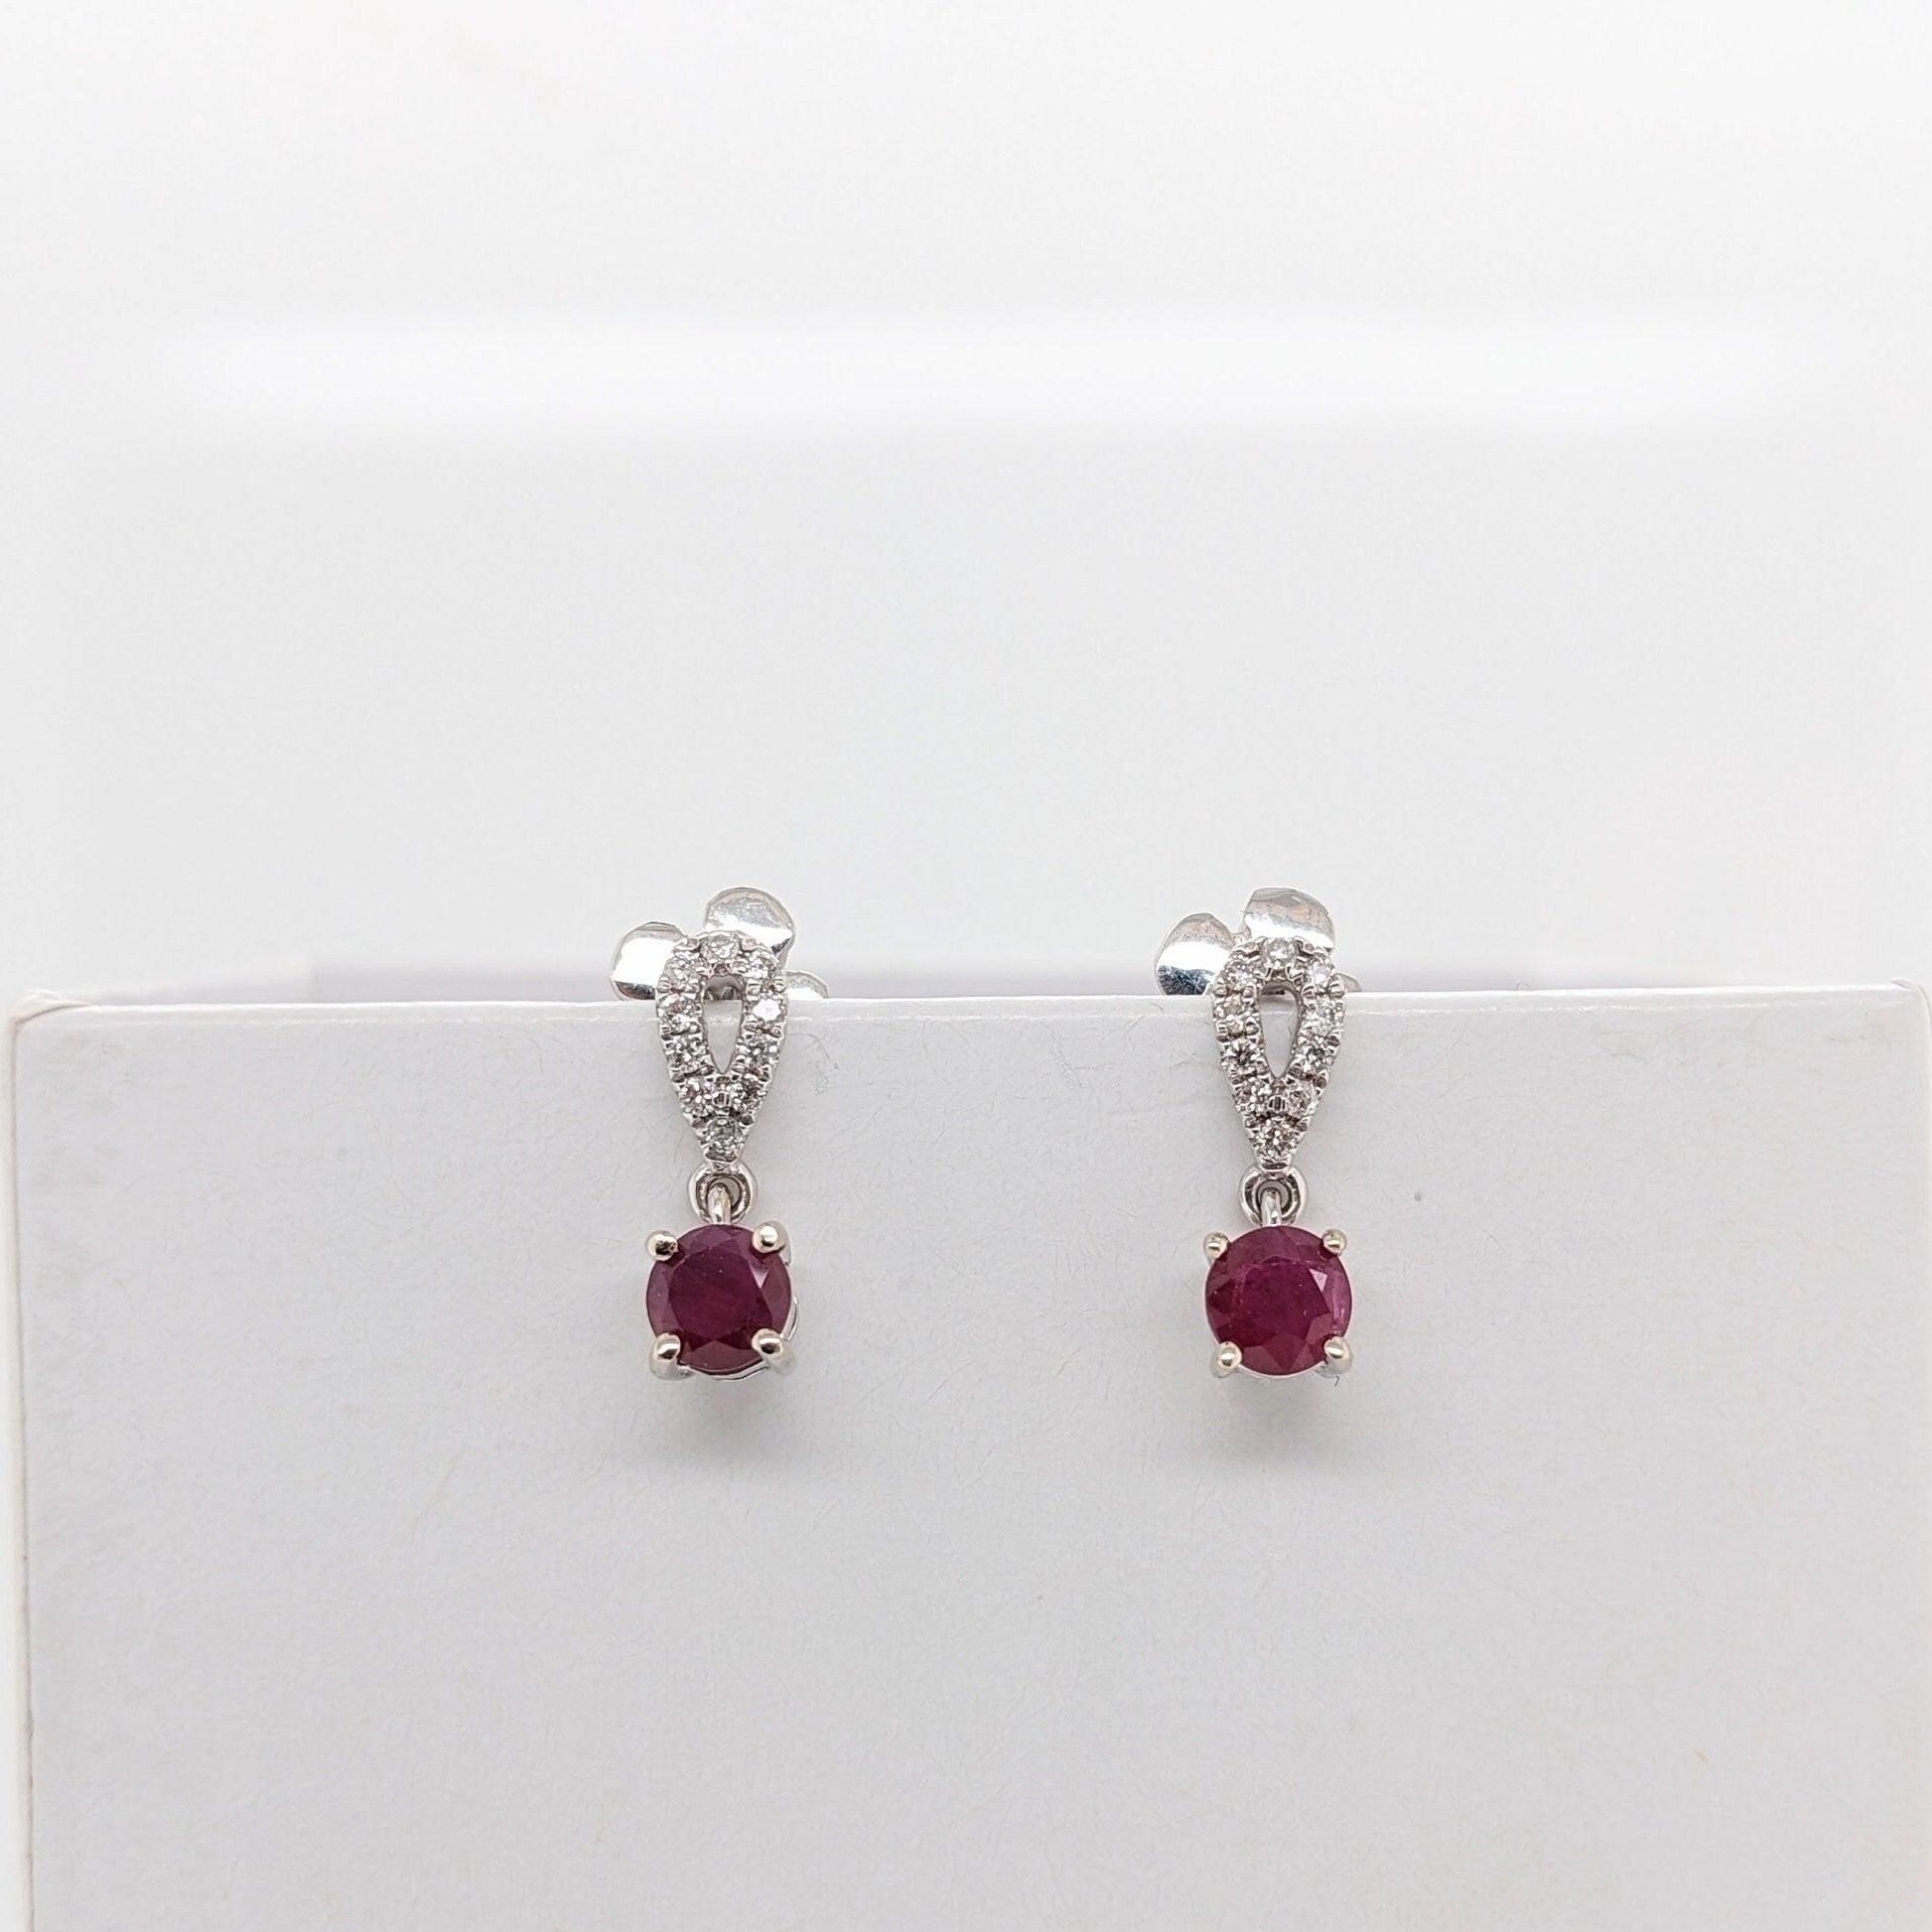 Stud Earrings-Beautiful Ruby Dangle Earrings in Solid 14K White Gold with Natural Diamond Accents | Round 4mm | Gemstone Earrings | Classic | Elegant - NNJGemstones